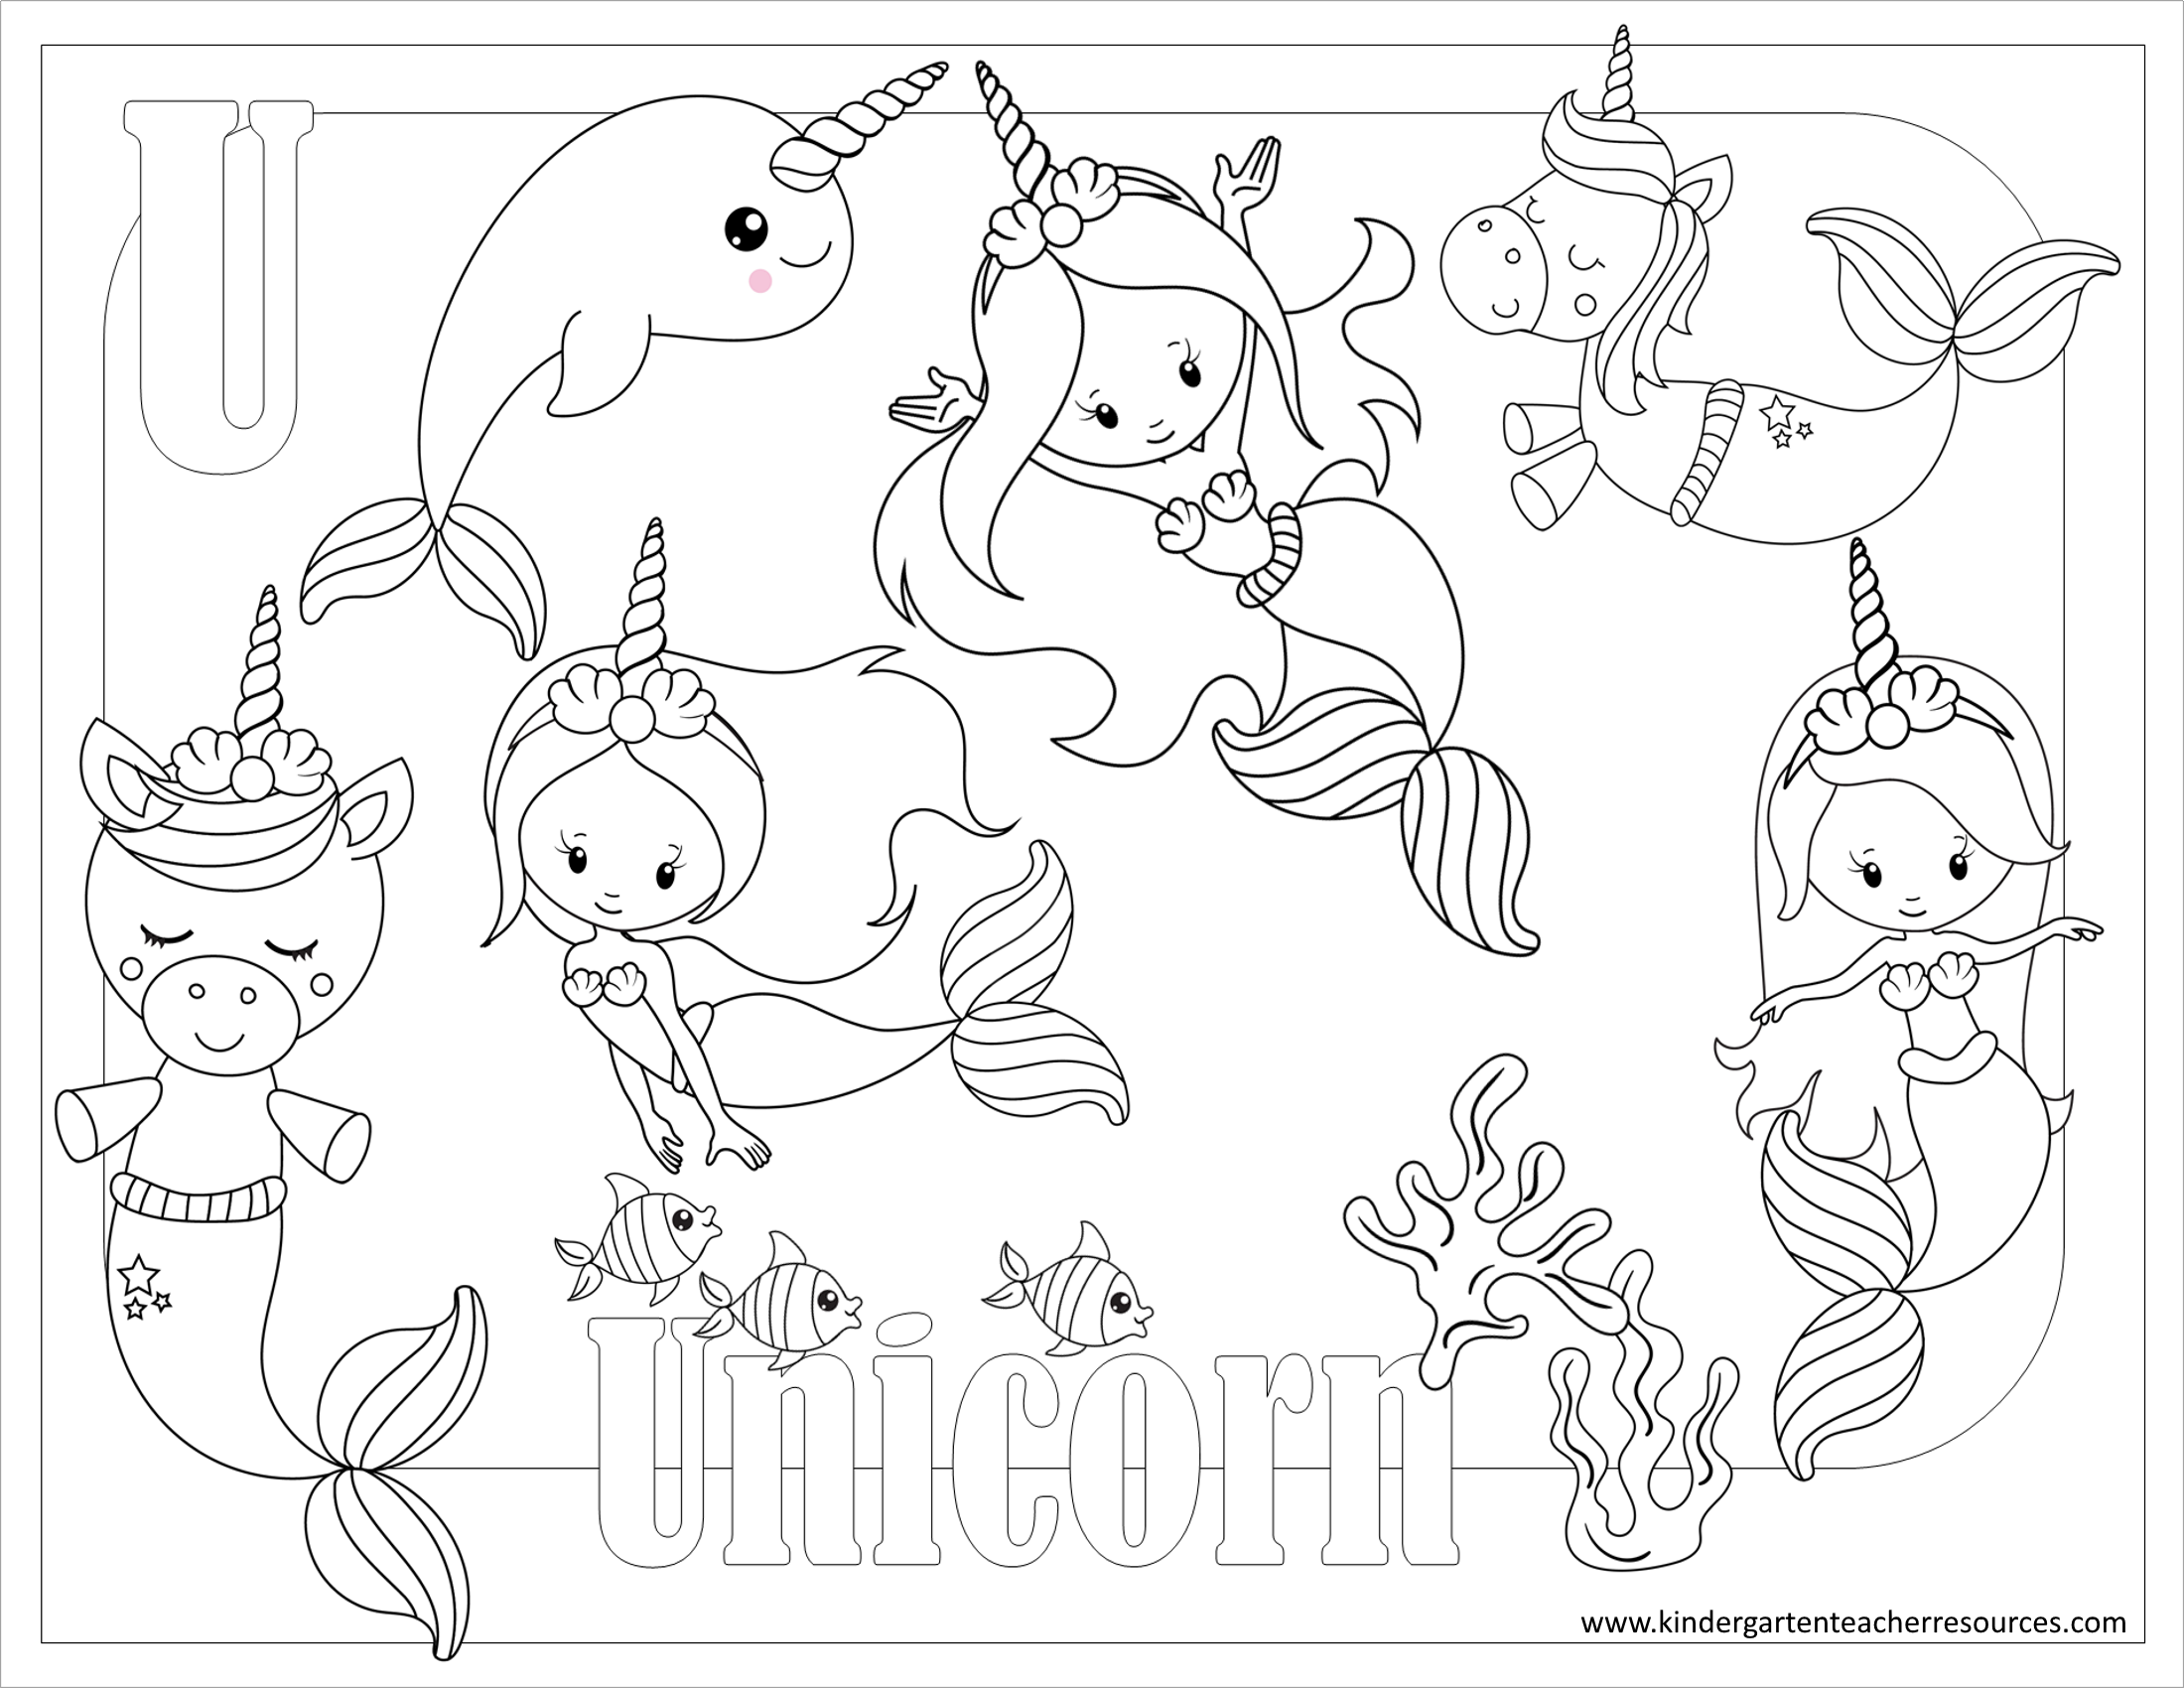 Download Free Printable Coloring Pages for Kindergarten